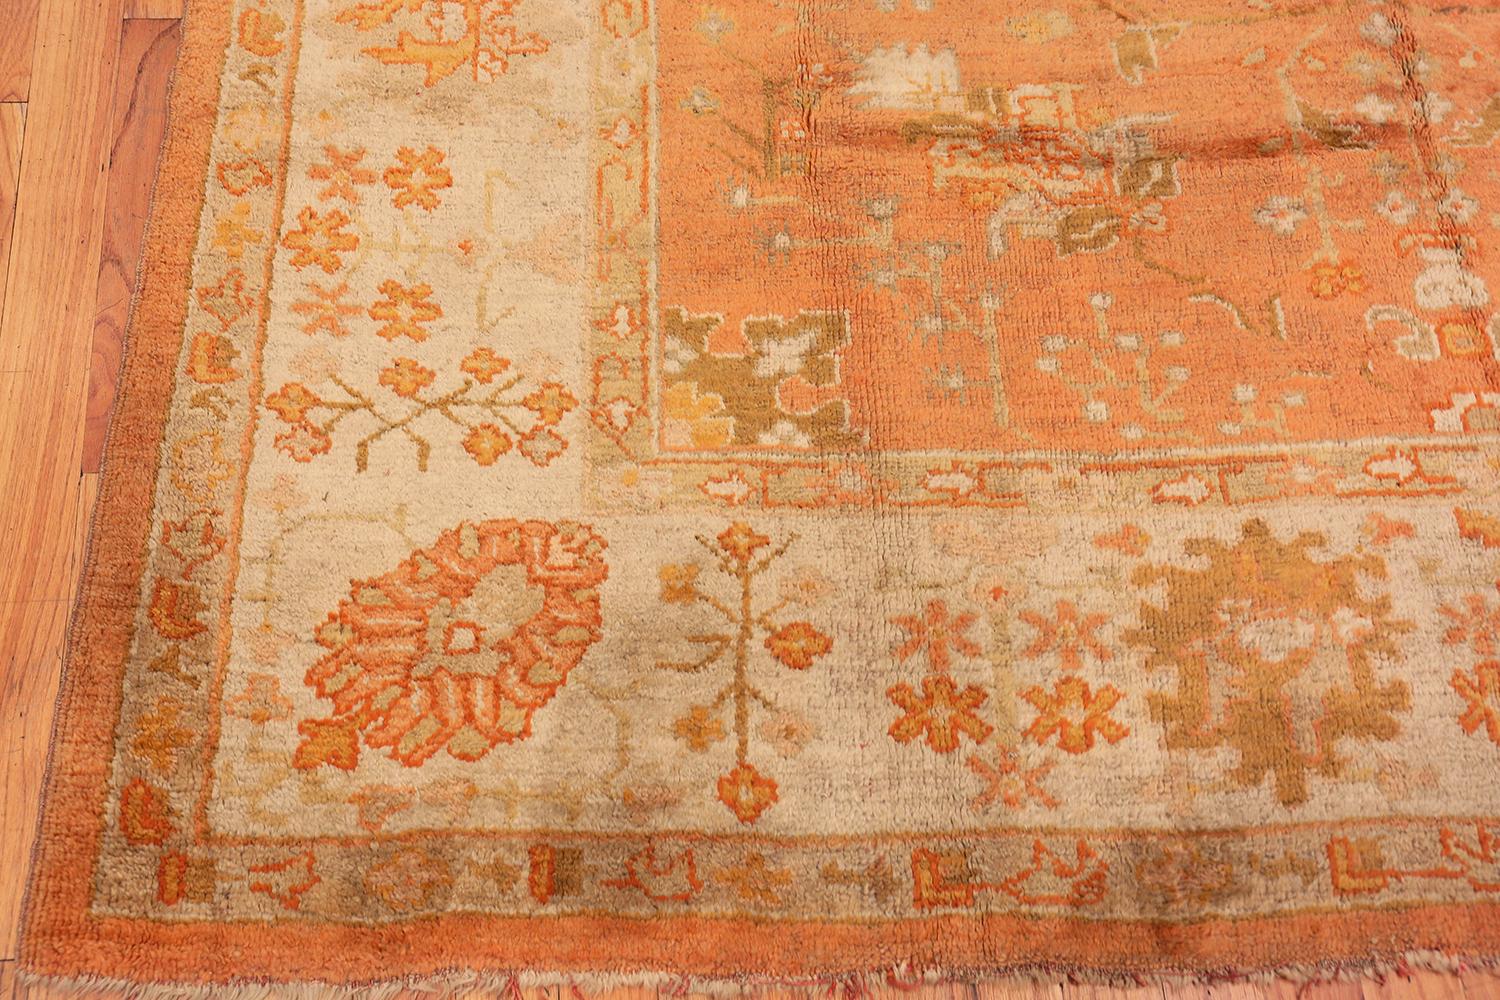 Hand-Knotted Antique Floral Turkish Oushak Rug. Size: 8 ft 2 in x 11 ft